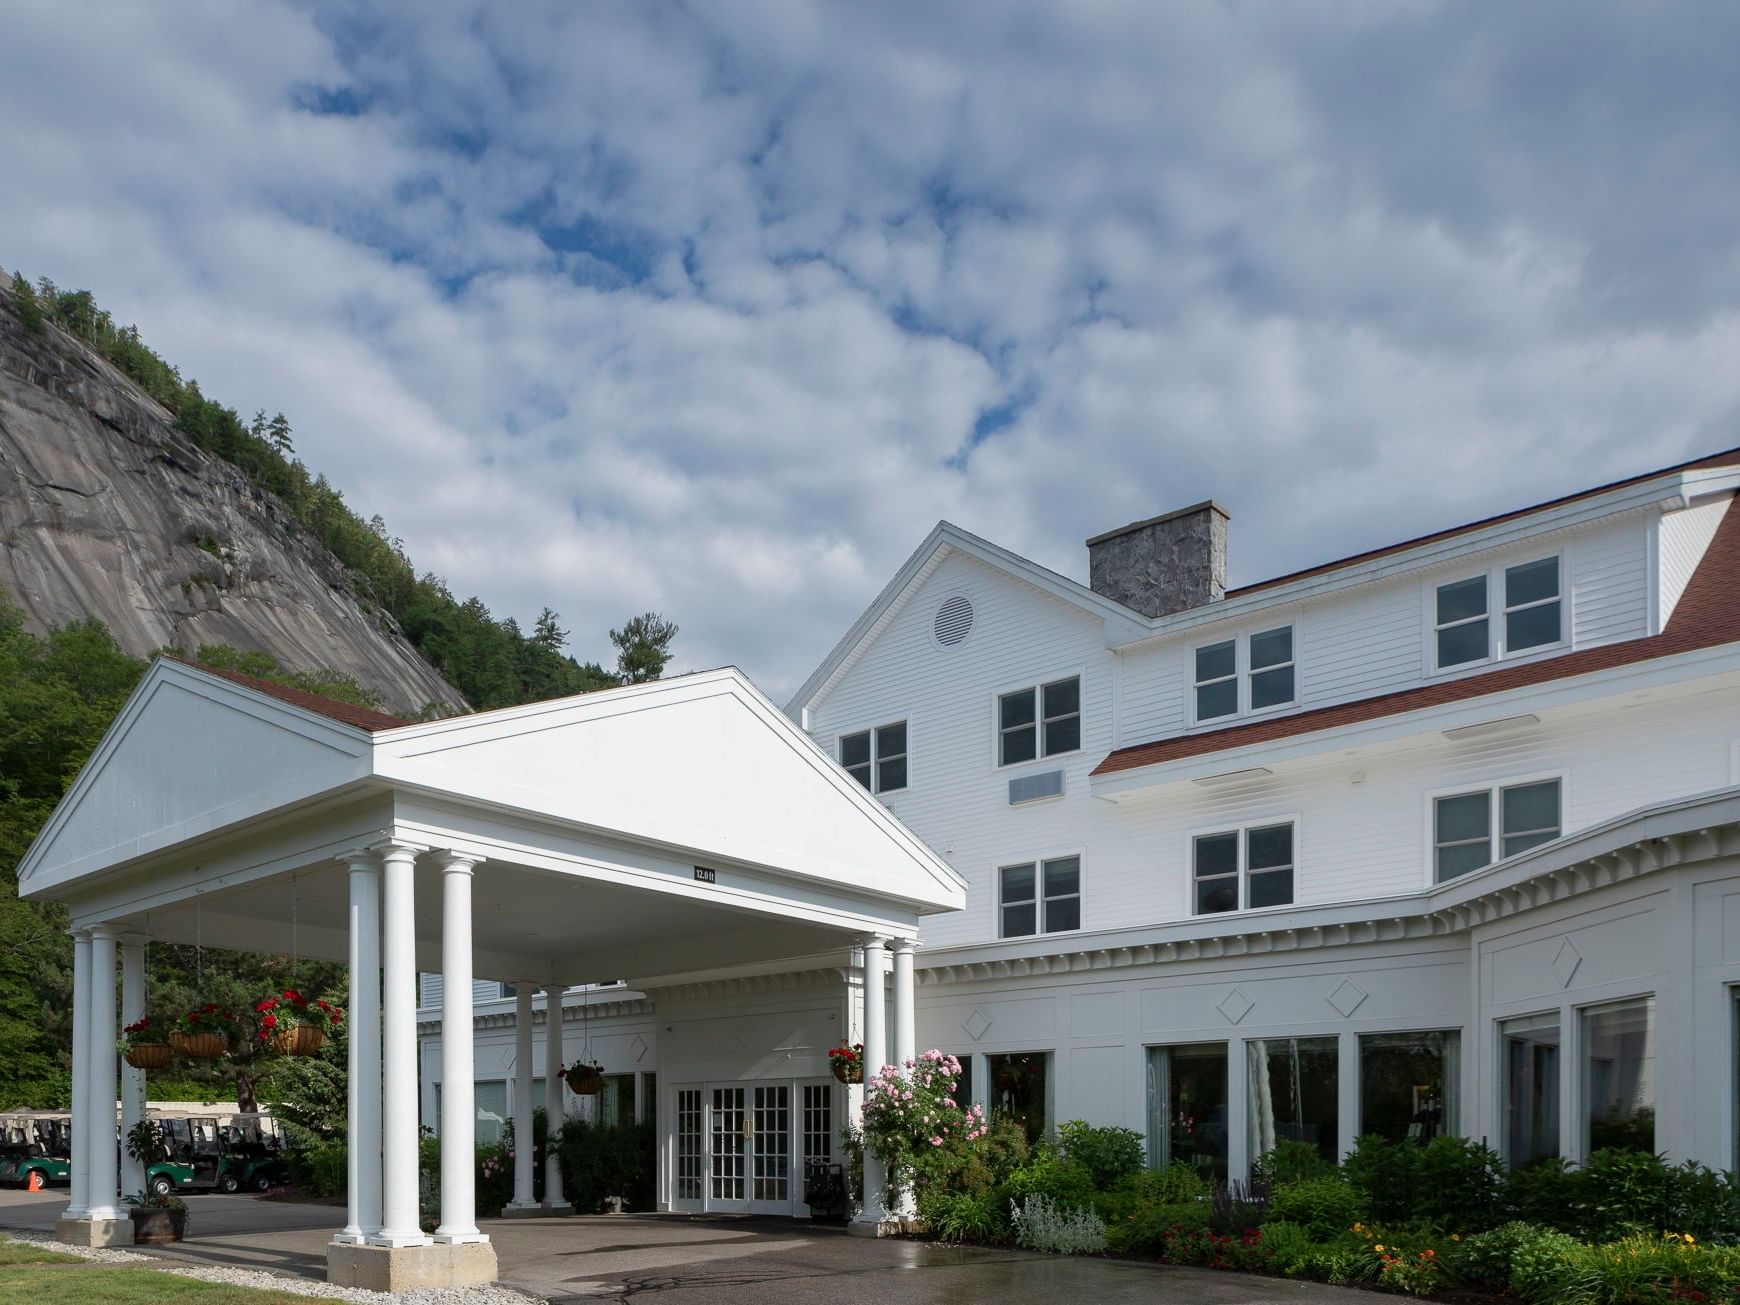 Exterior view of the White Mountain Hotel & Resort